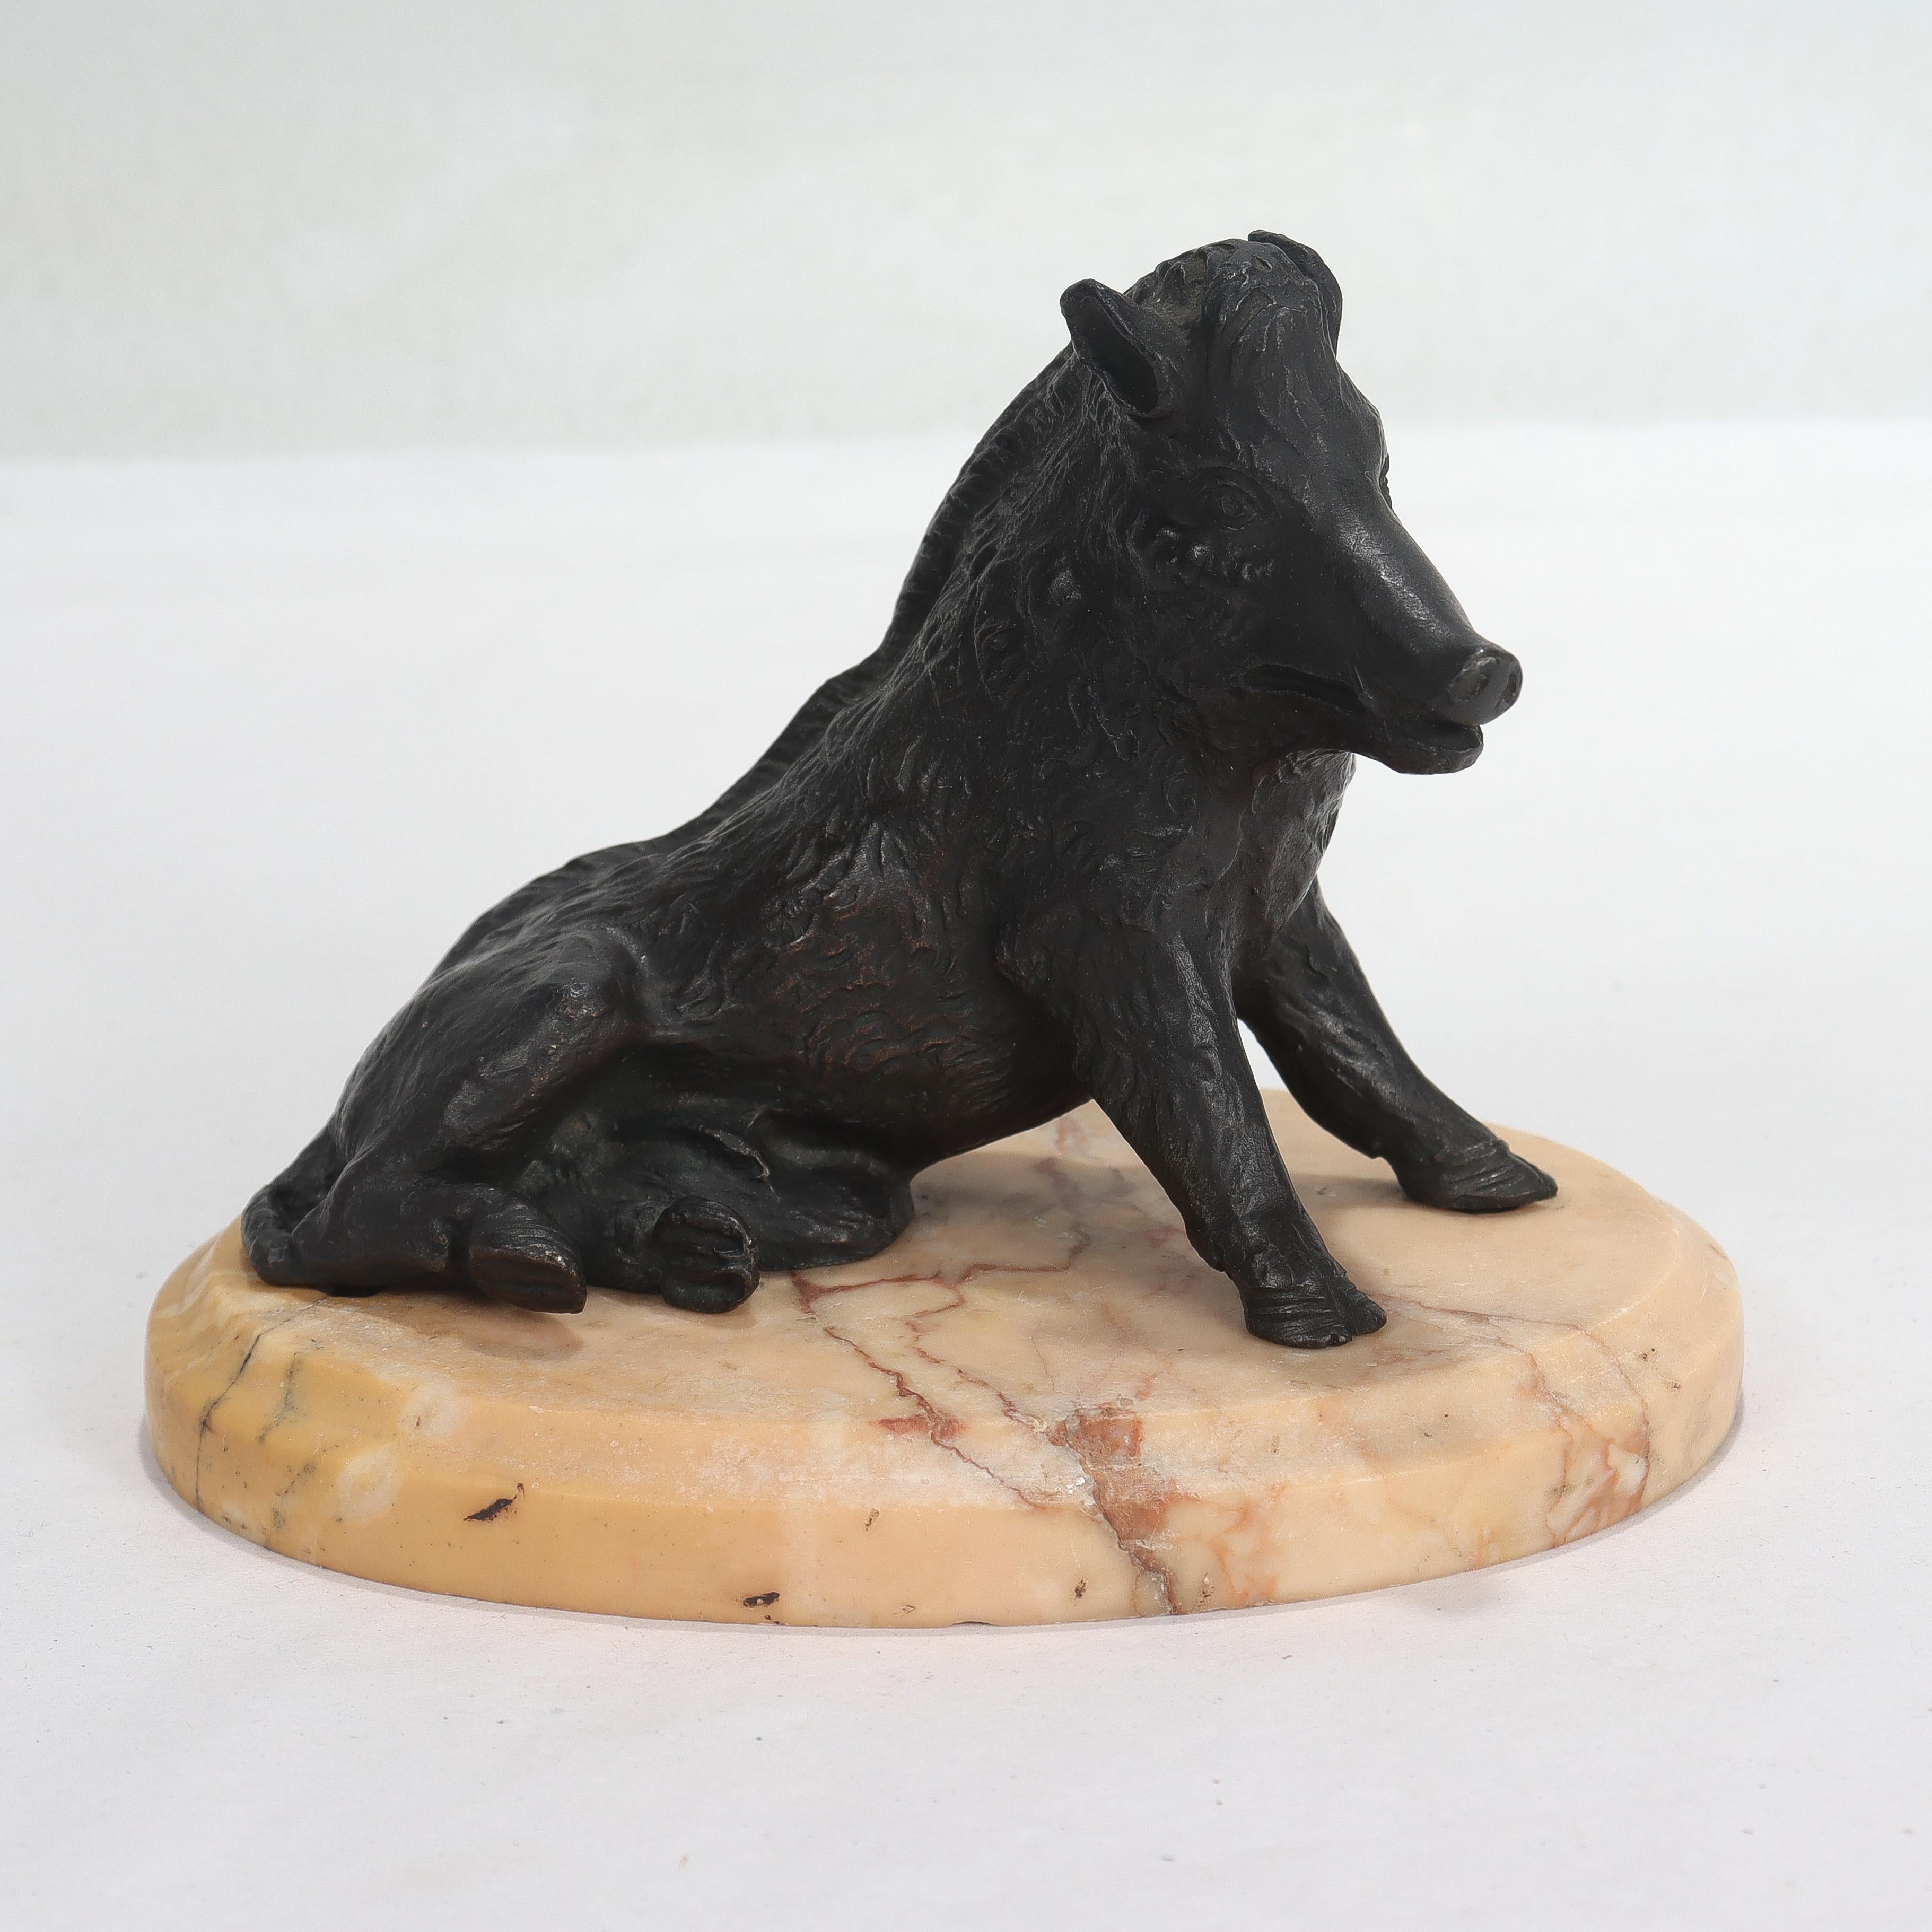 A fine antique Grand Tour bronze sculpture.

Depicting a seated boar on a pink Italian marble plinth. 

